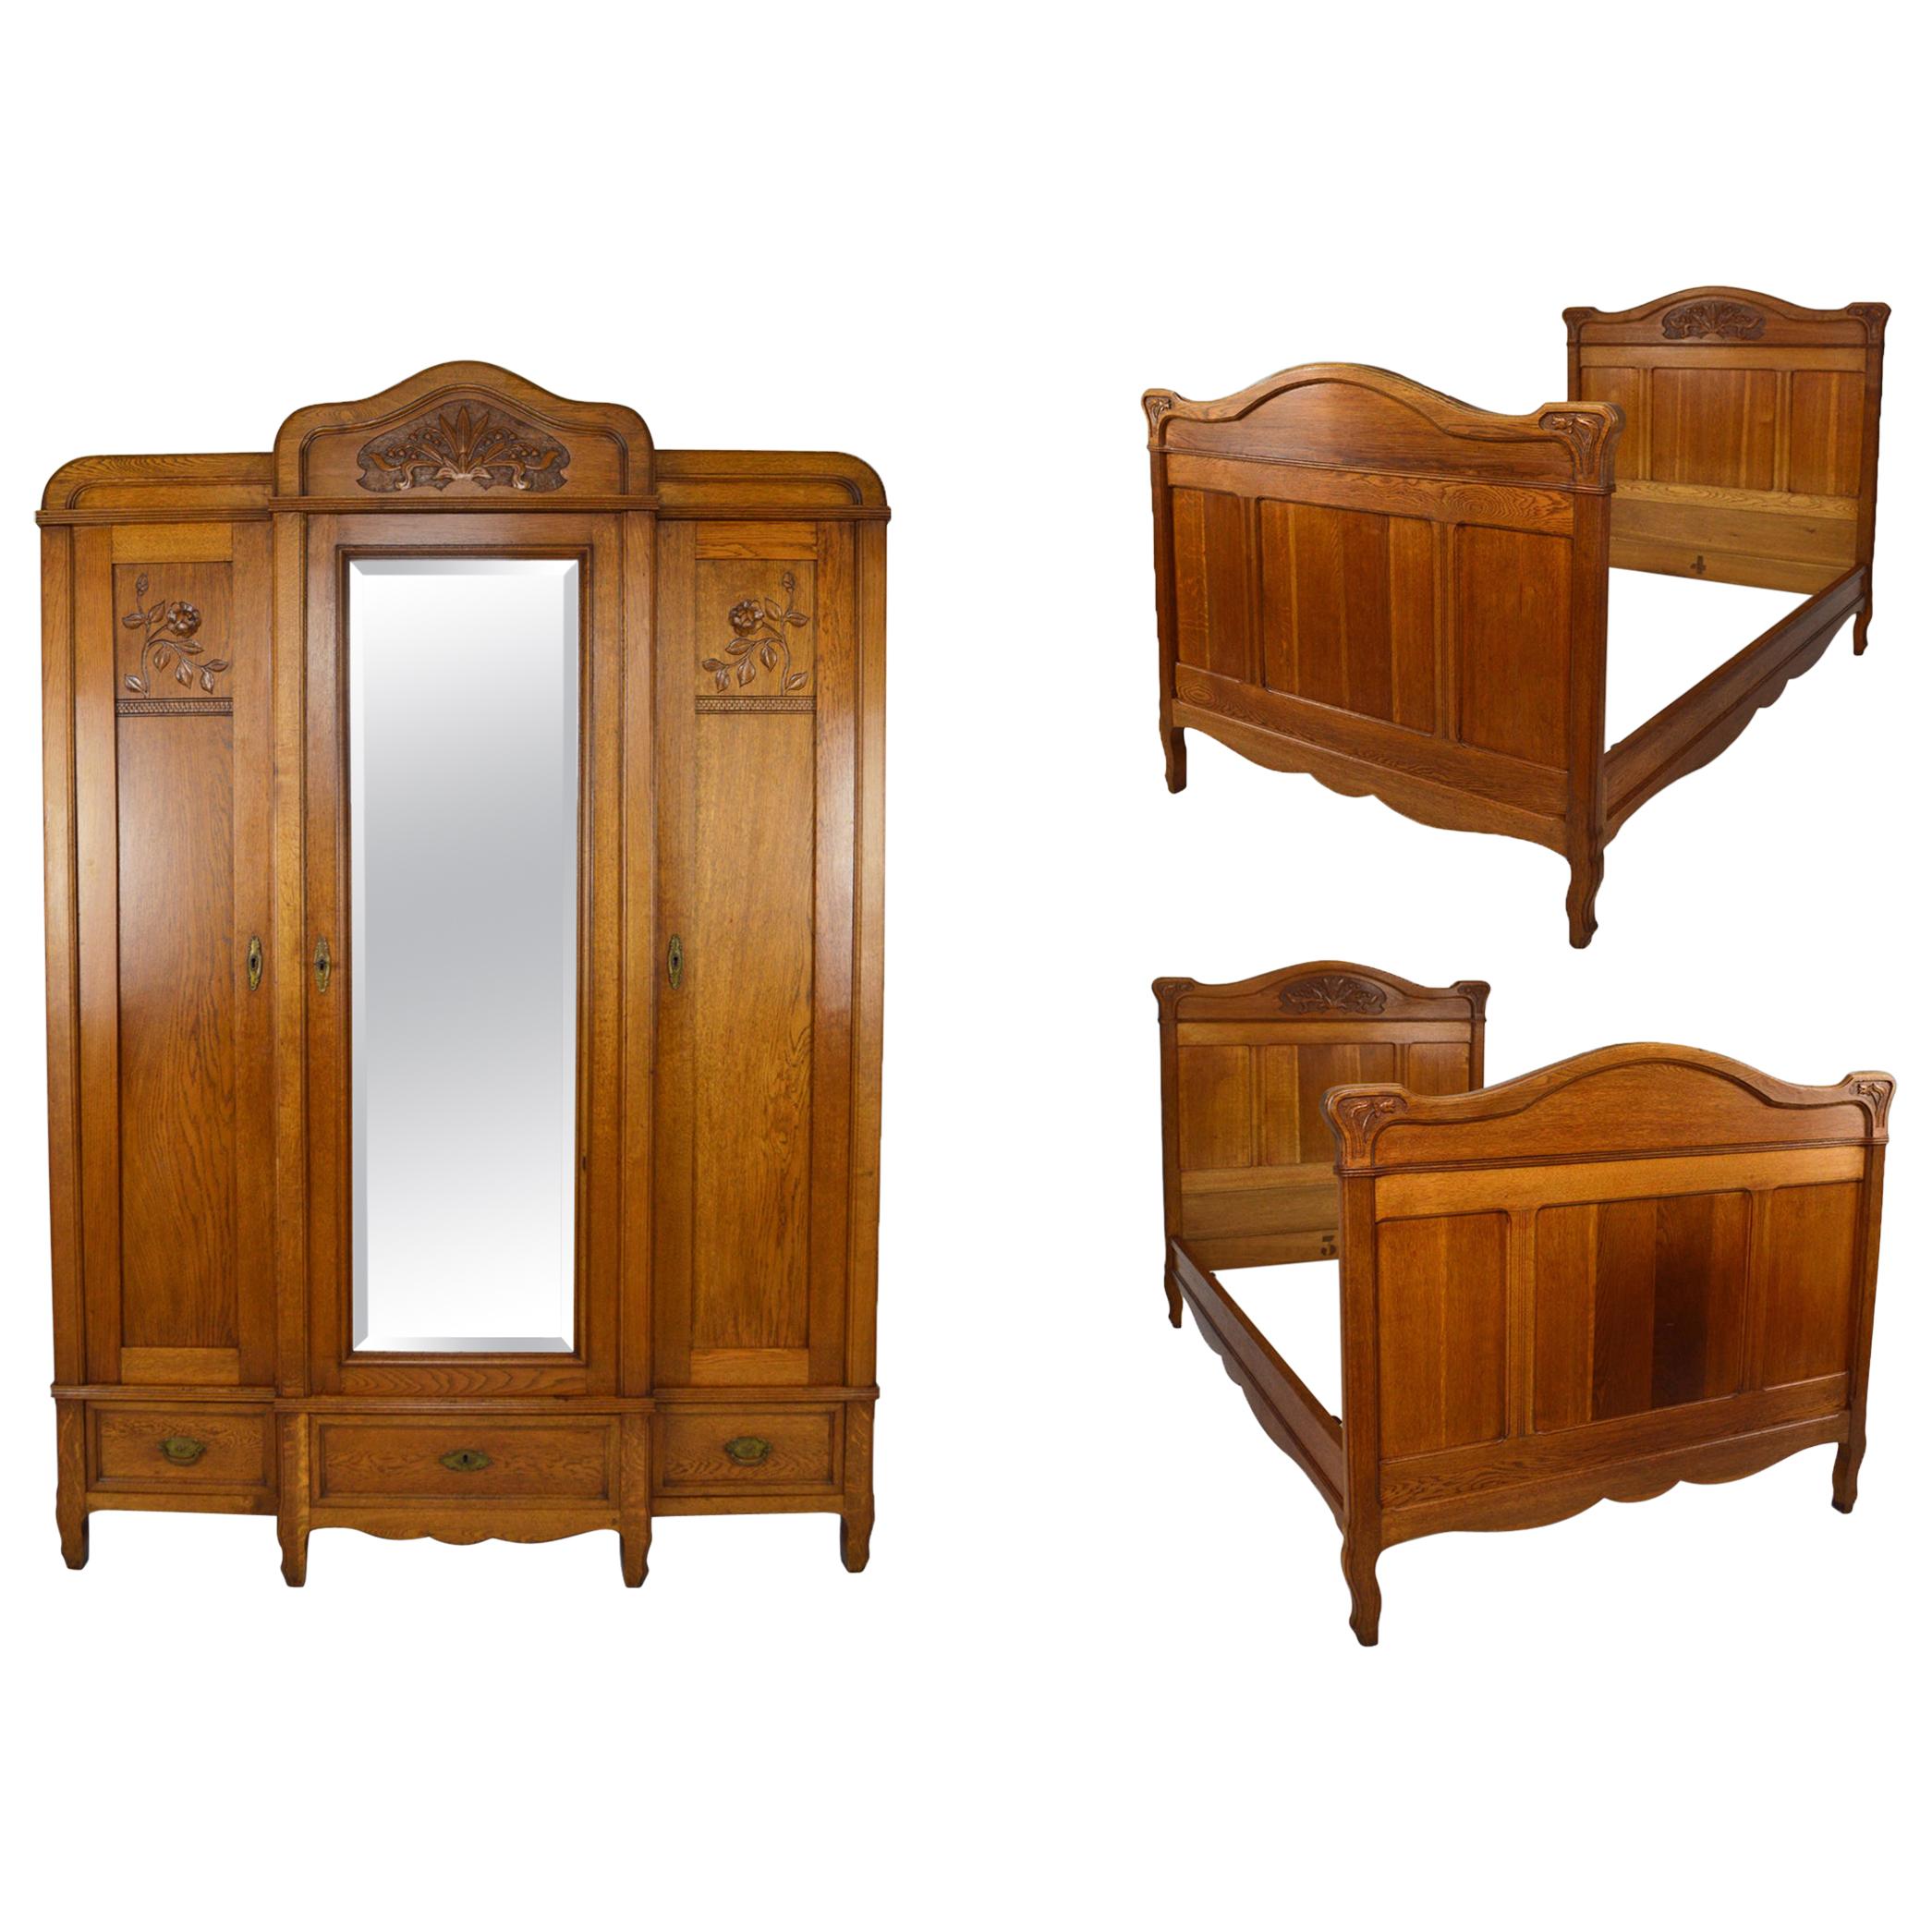 French Art Nouveau Twin Beds Bedroom Set of 3 in Solid Carved Oak, circa 1910 For Sale